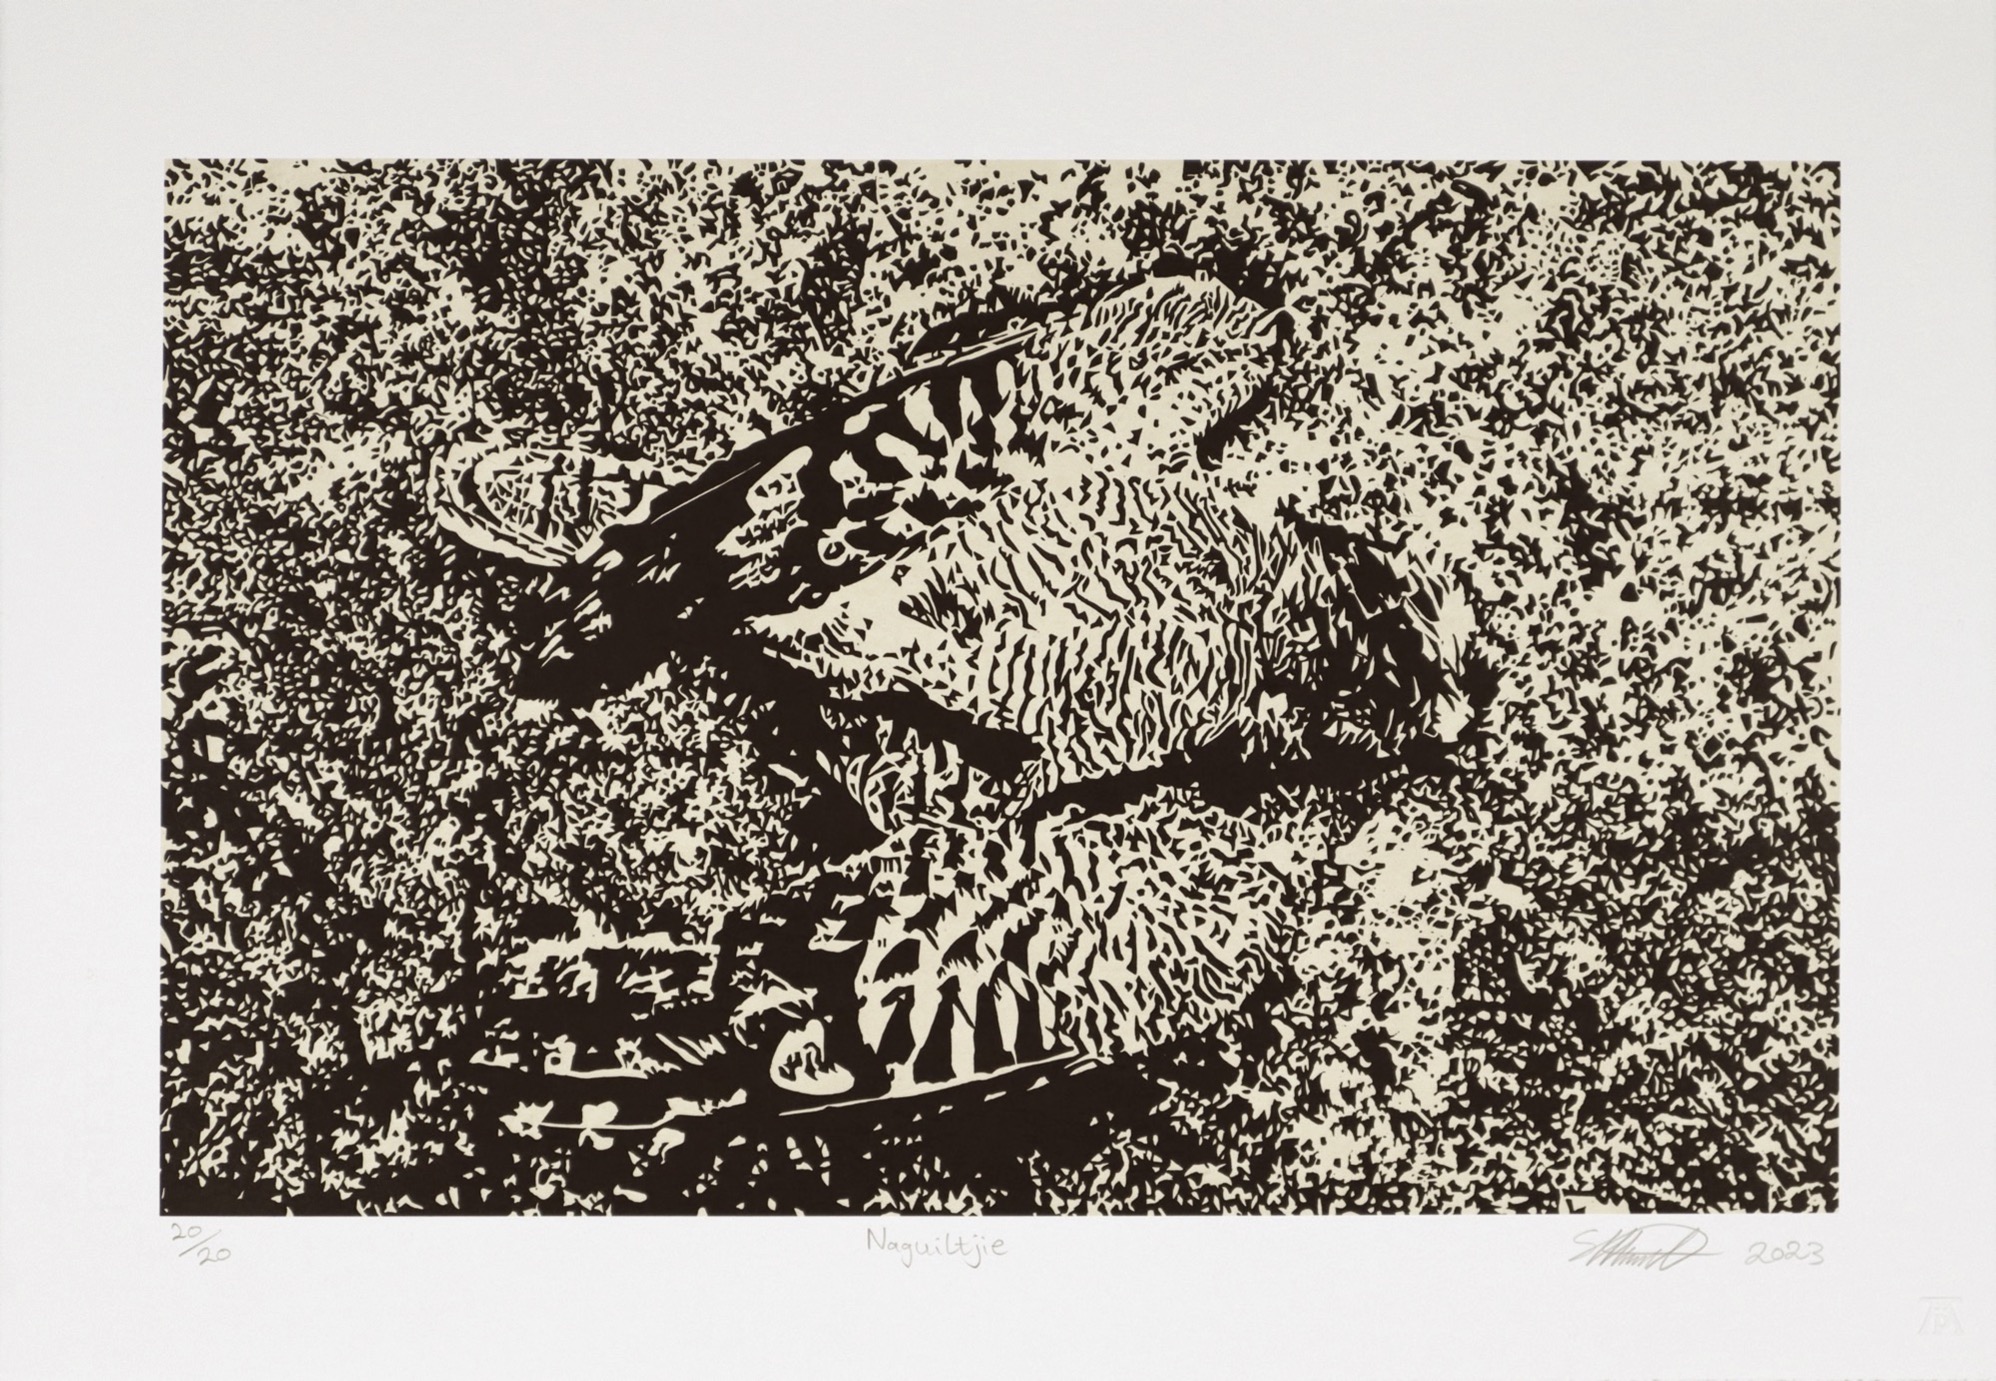 South African art nightjar bird print limited edition signed by Simon Attwood